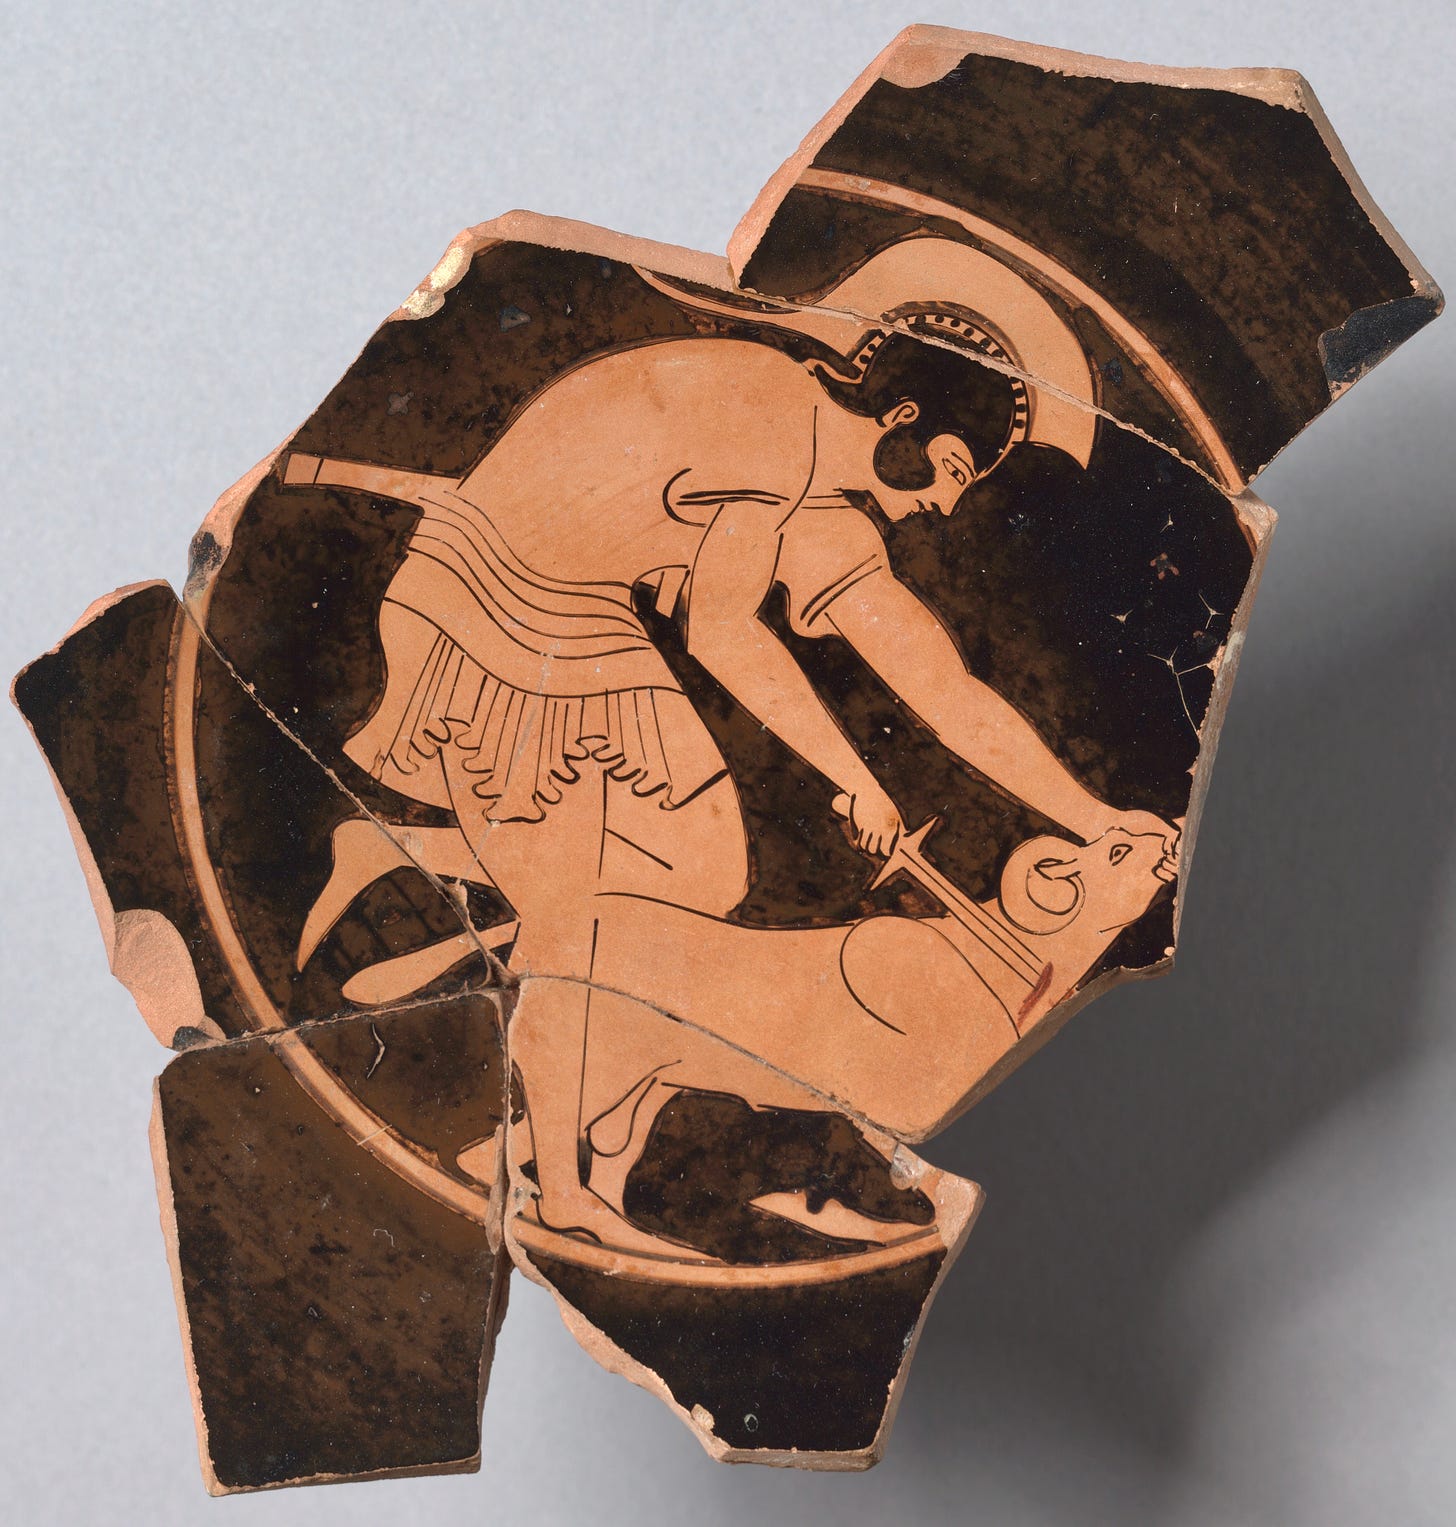 Greece,_Attic,_5th_Century_BC_-_Fragment_of_a_Kylix_-_1926.242_-_Cleveland_Museum_of_Art.jpg